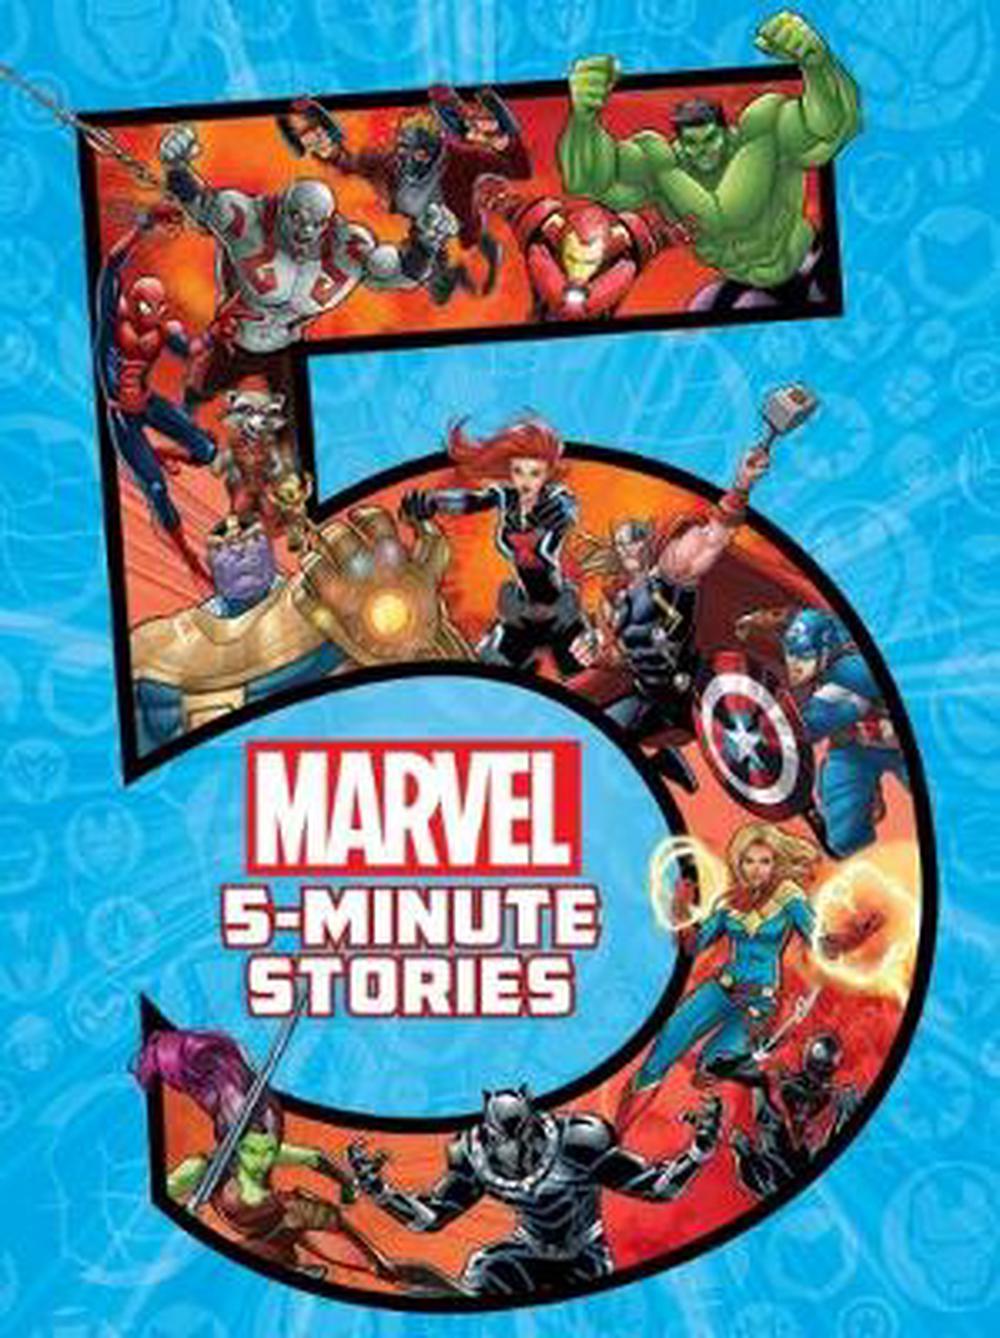 Marvel 5Minute Stories (English) Hardcover Book Free